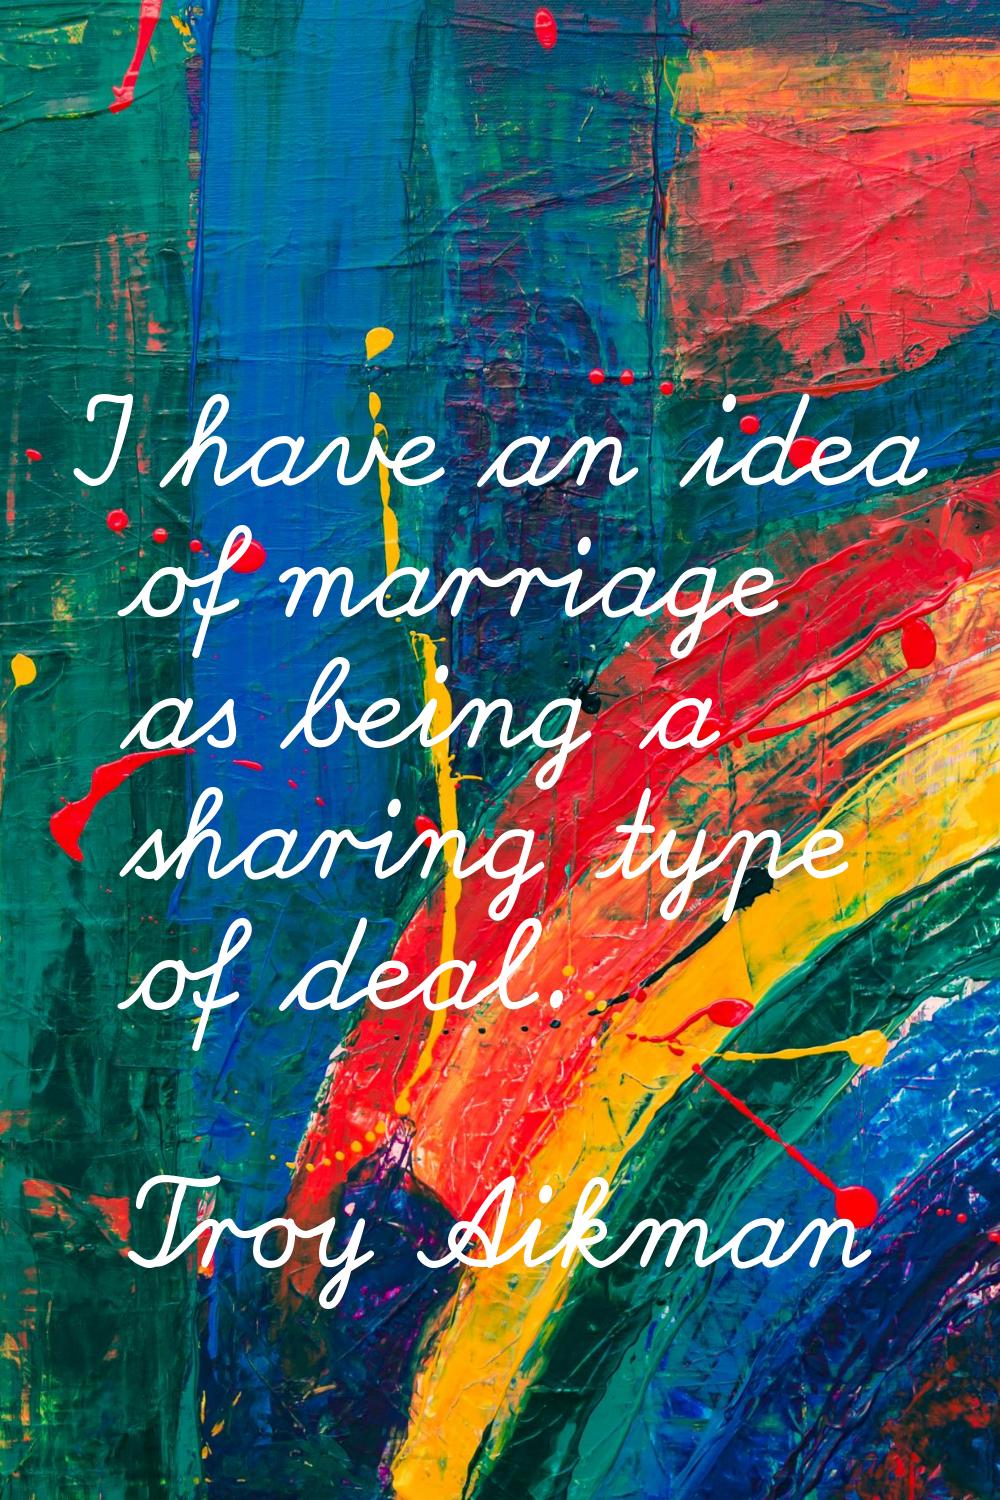 I have an idea of marriage as being a sharing type of deal.